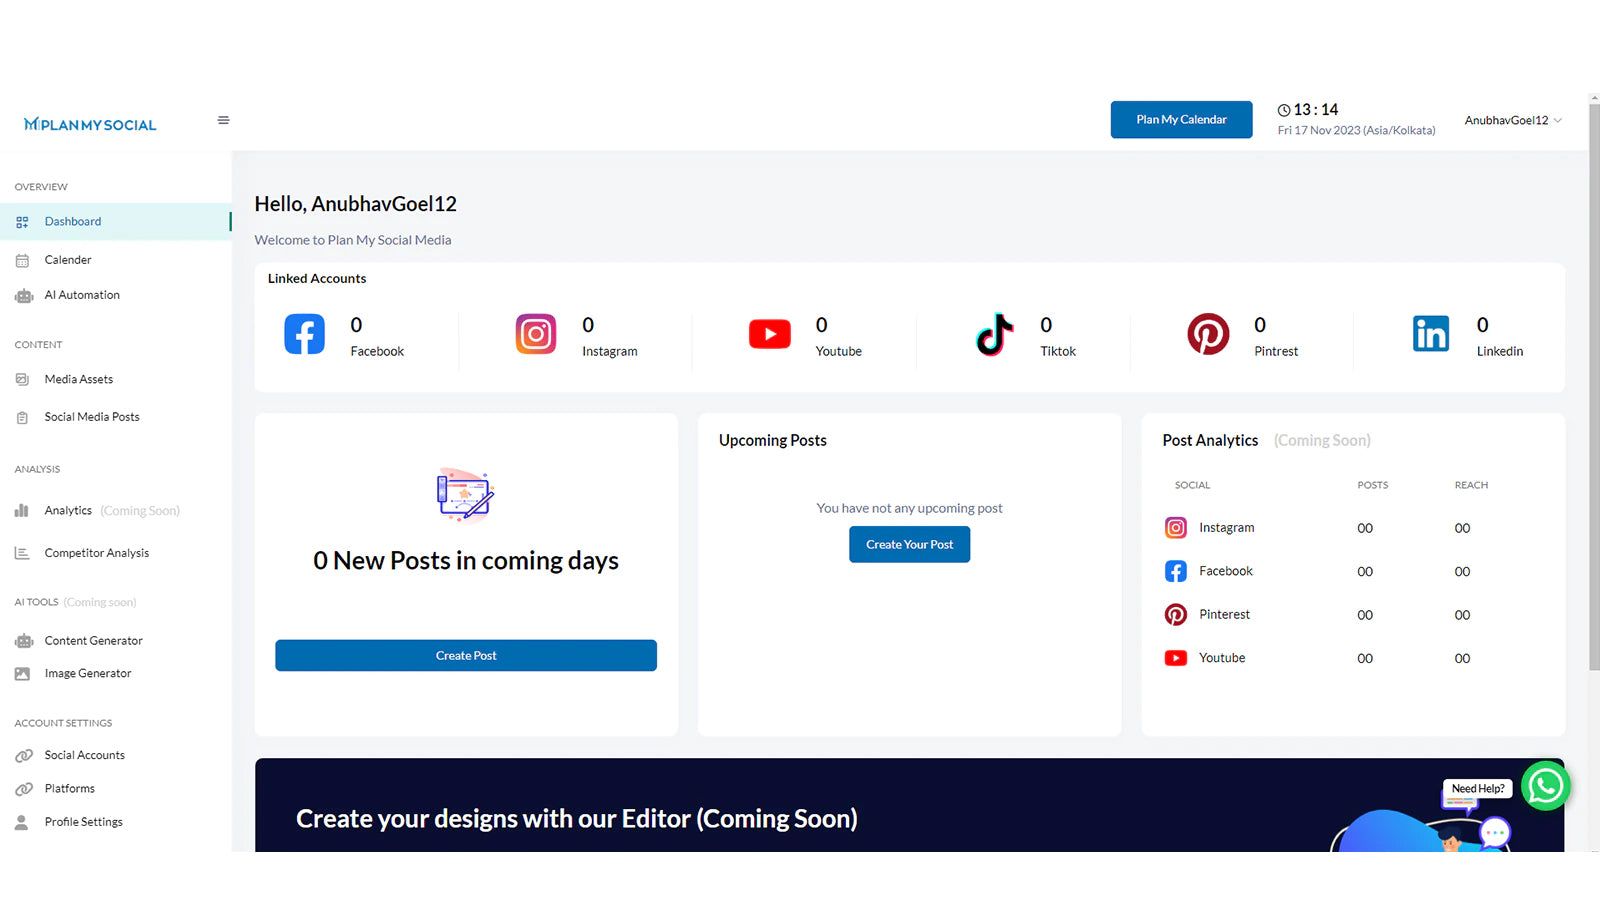 Dashboard to add social account & to create new post.